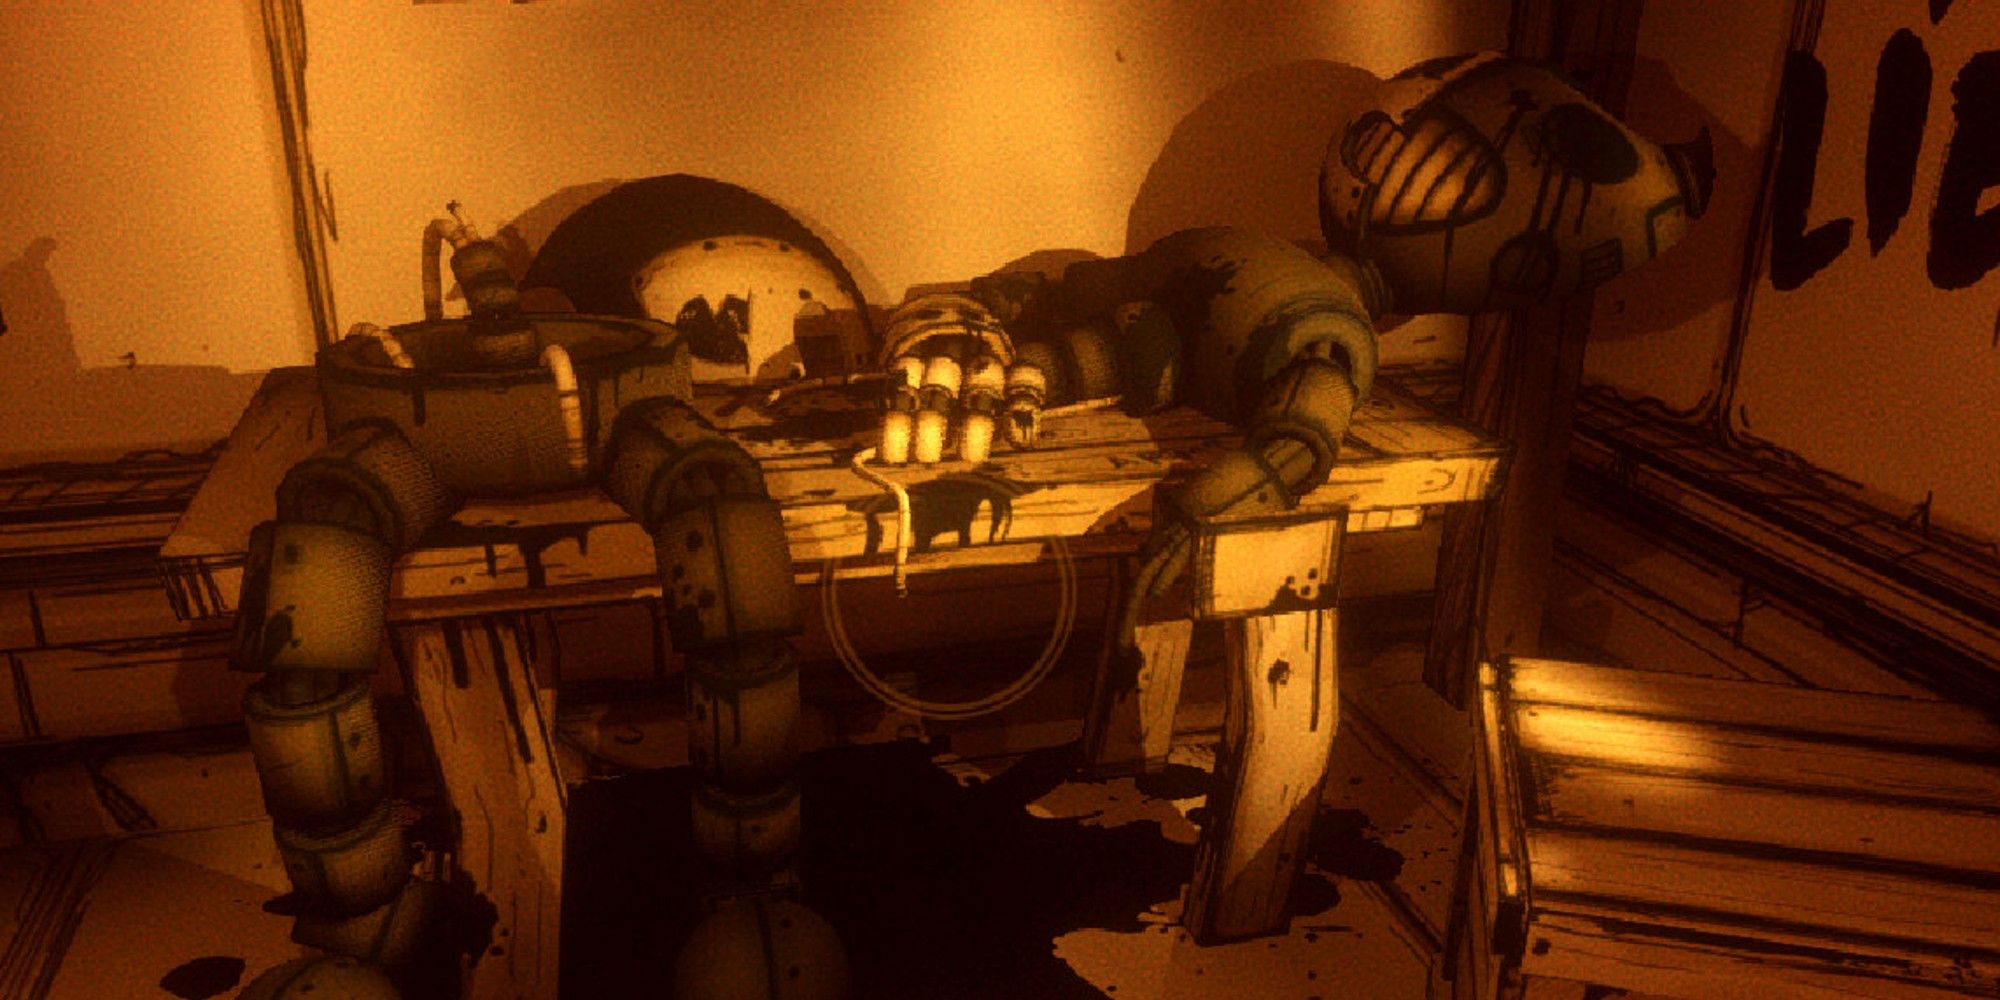 Animatronic Bendy - Bendy and the Ink Machine chilling on the table